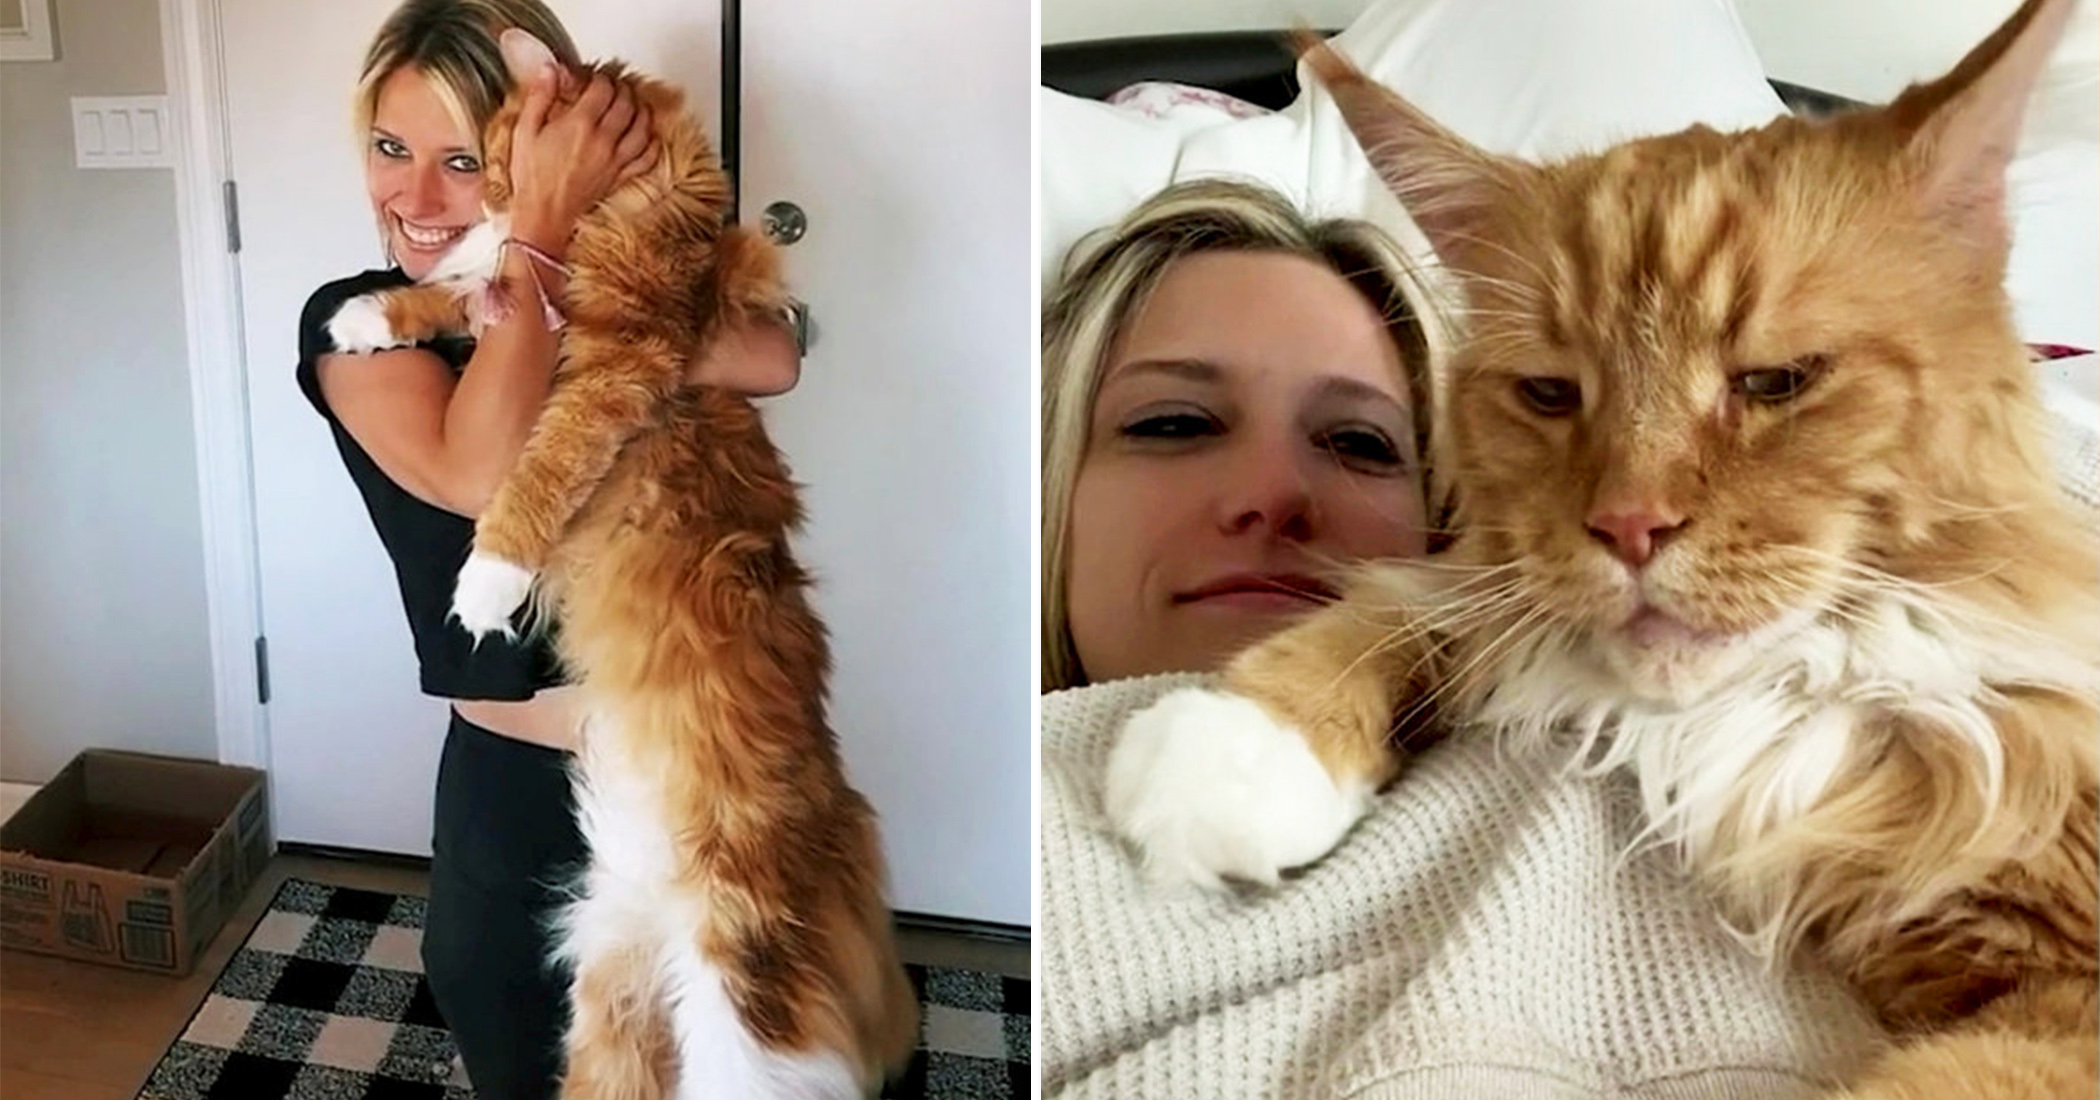 This Giant Maine Coon Is So Big It’s Already the Average Height of a 9